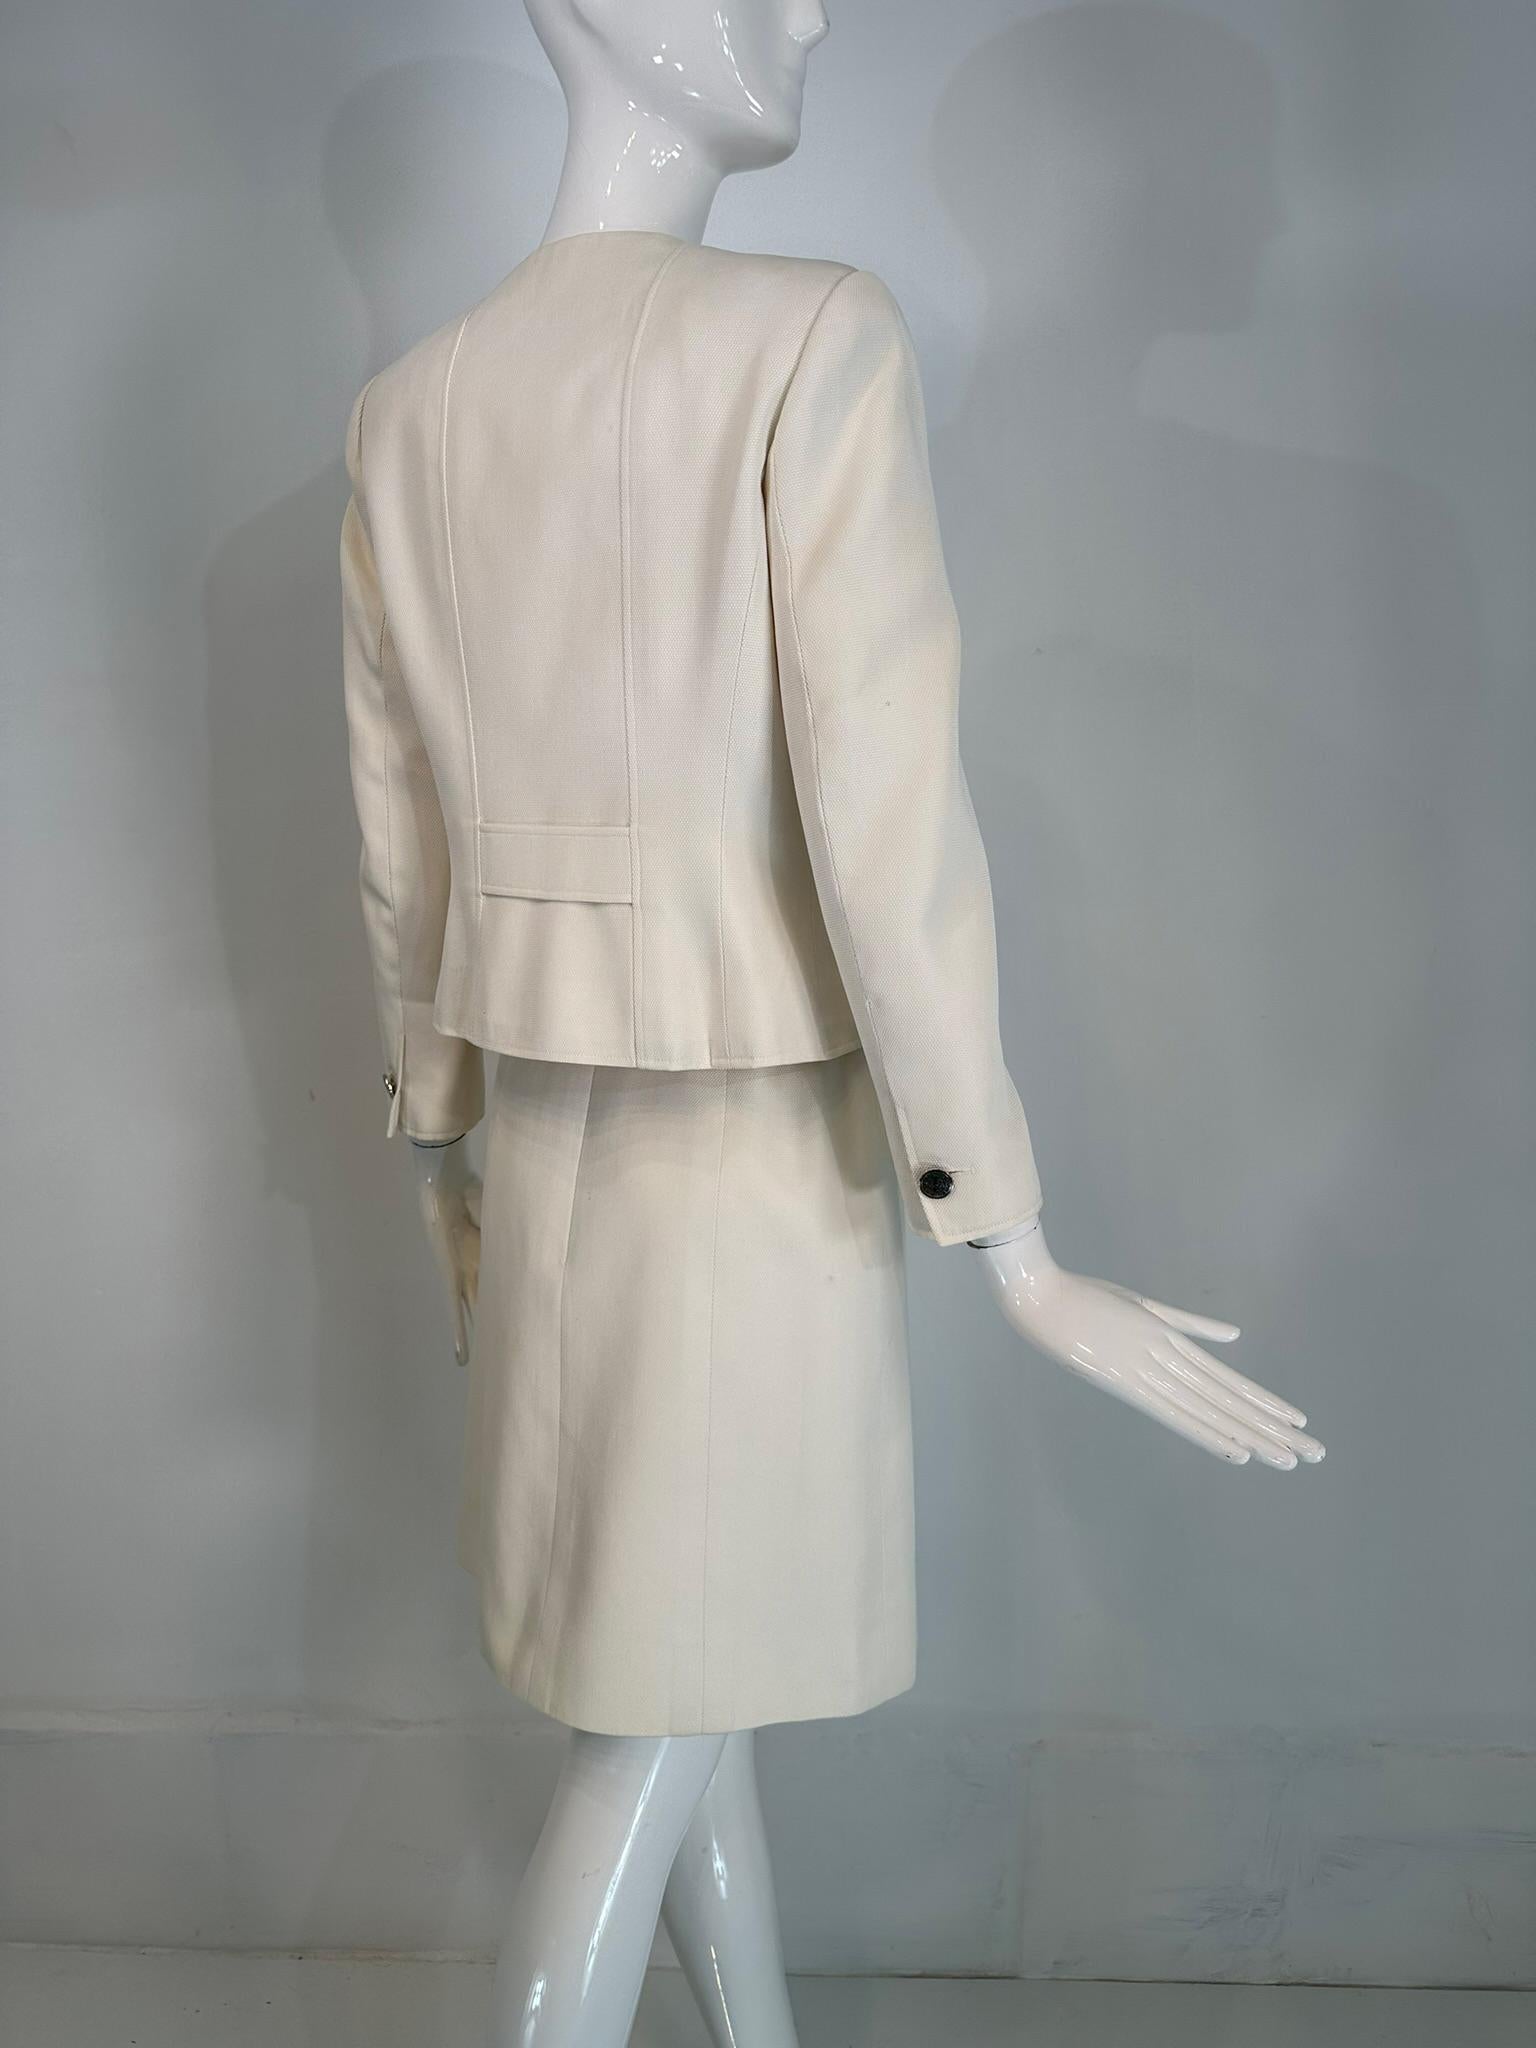 Chanel 1997 C Off White Cotton Pique Double Breasted Cropped Jacket & Skirt 40 For Sale 4